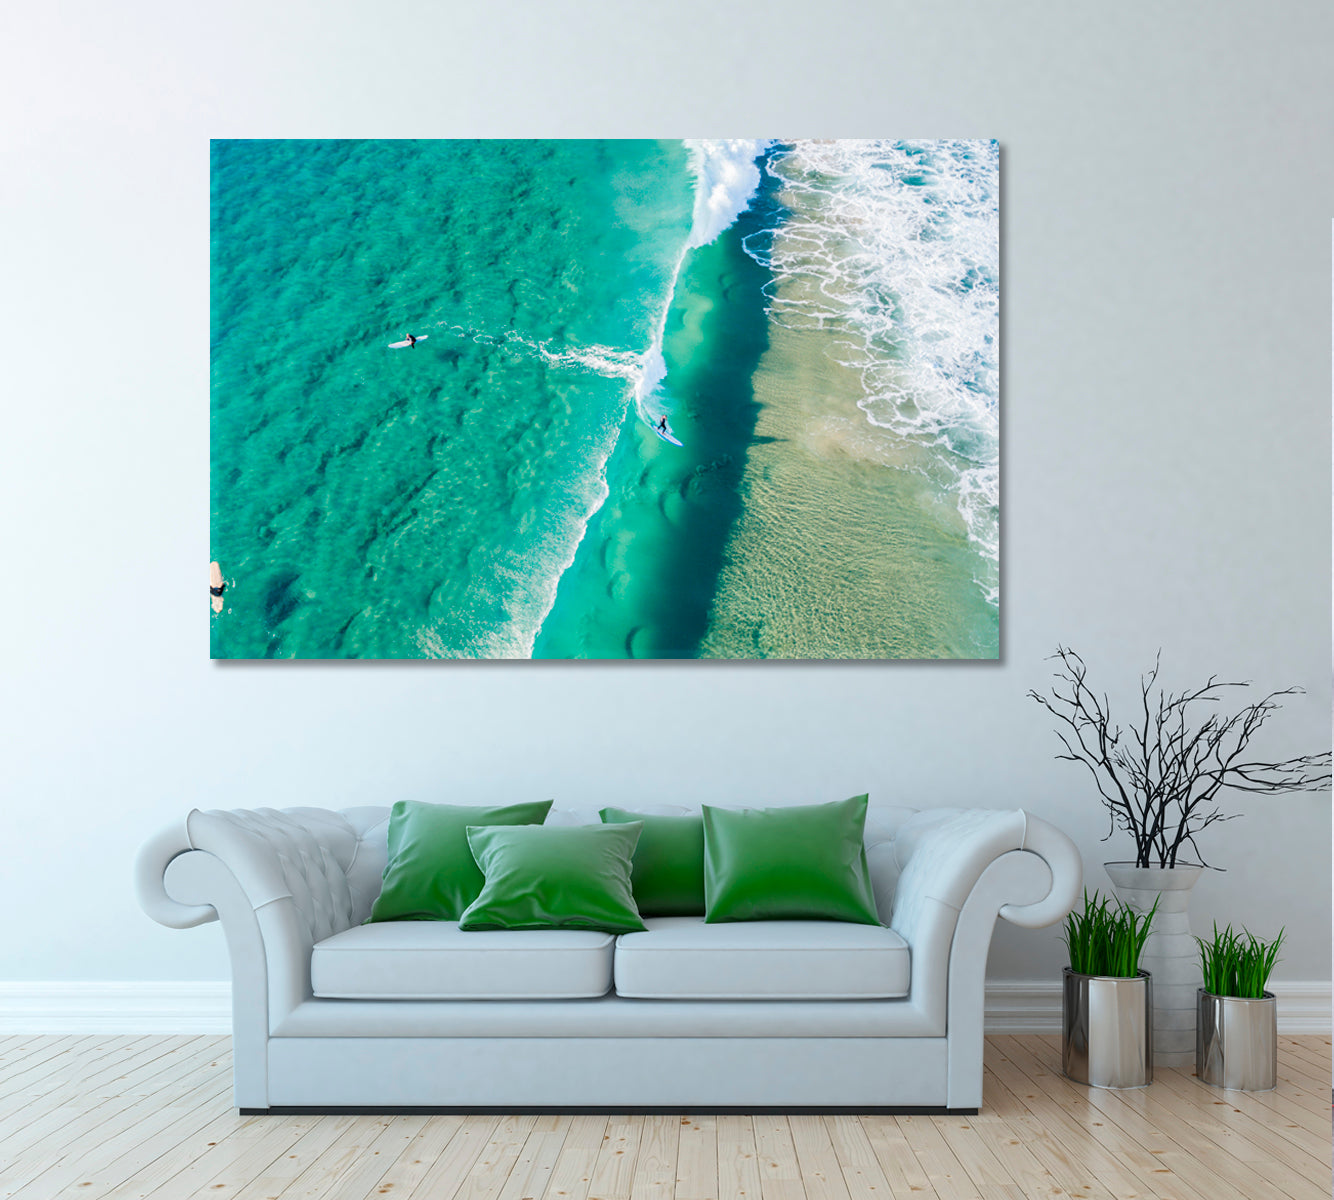 Surfer Riding Wave on Gold Coast in Queensland Australia Canvas Print ArtLexy 1 Panel 24"x16" inches 